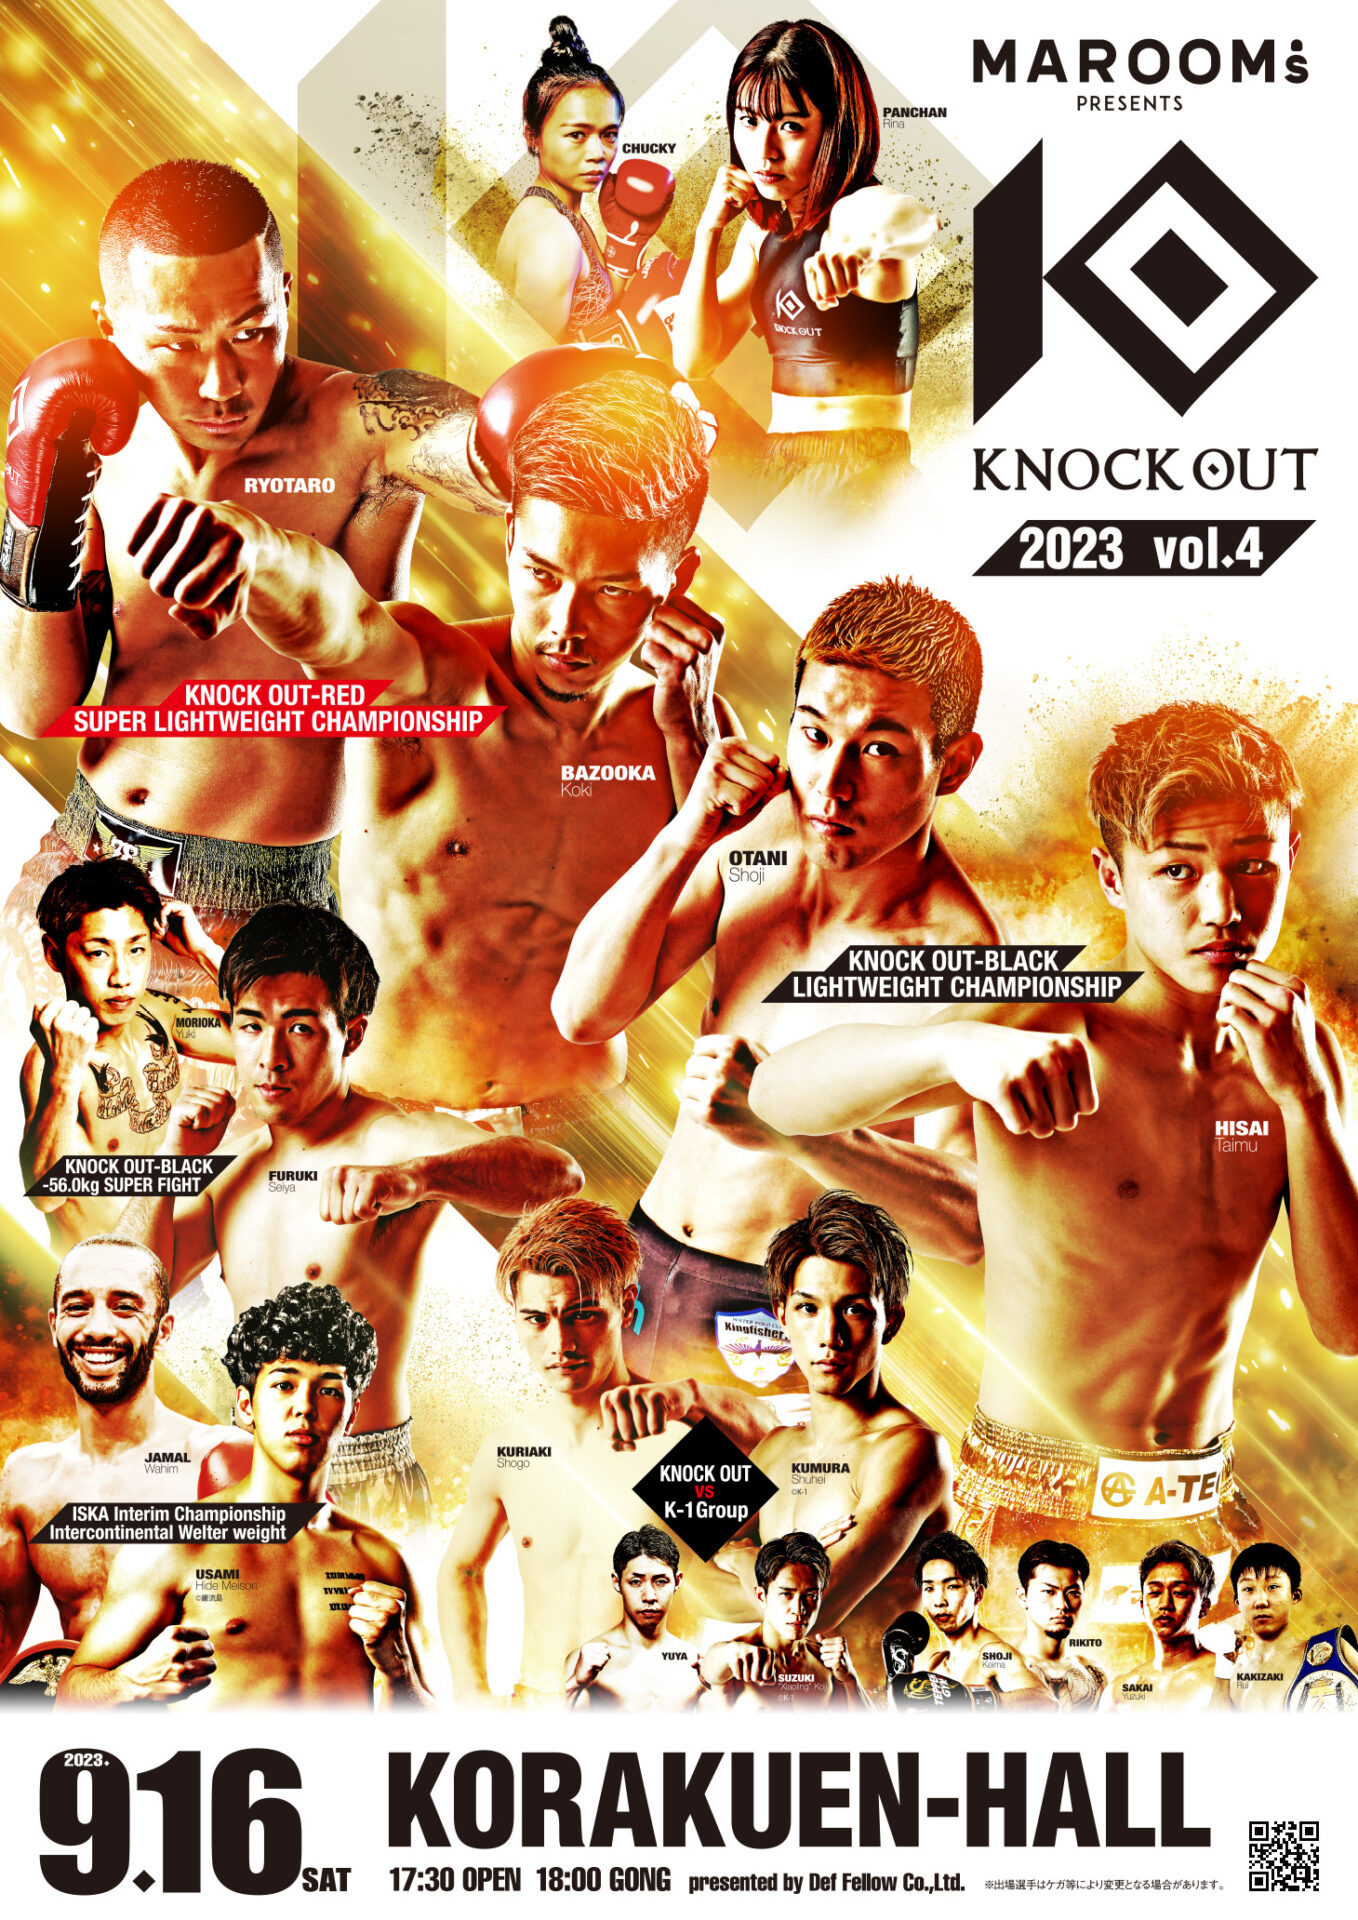 『MAROOMS presents KNOCK OUT 2023 vol.4』は9月16日（土）に後楽園ホールで開催 （c）knock out